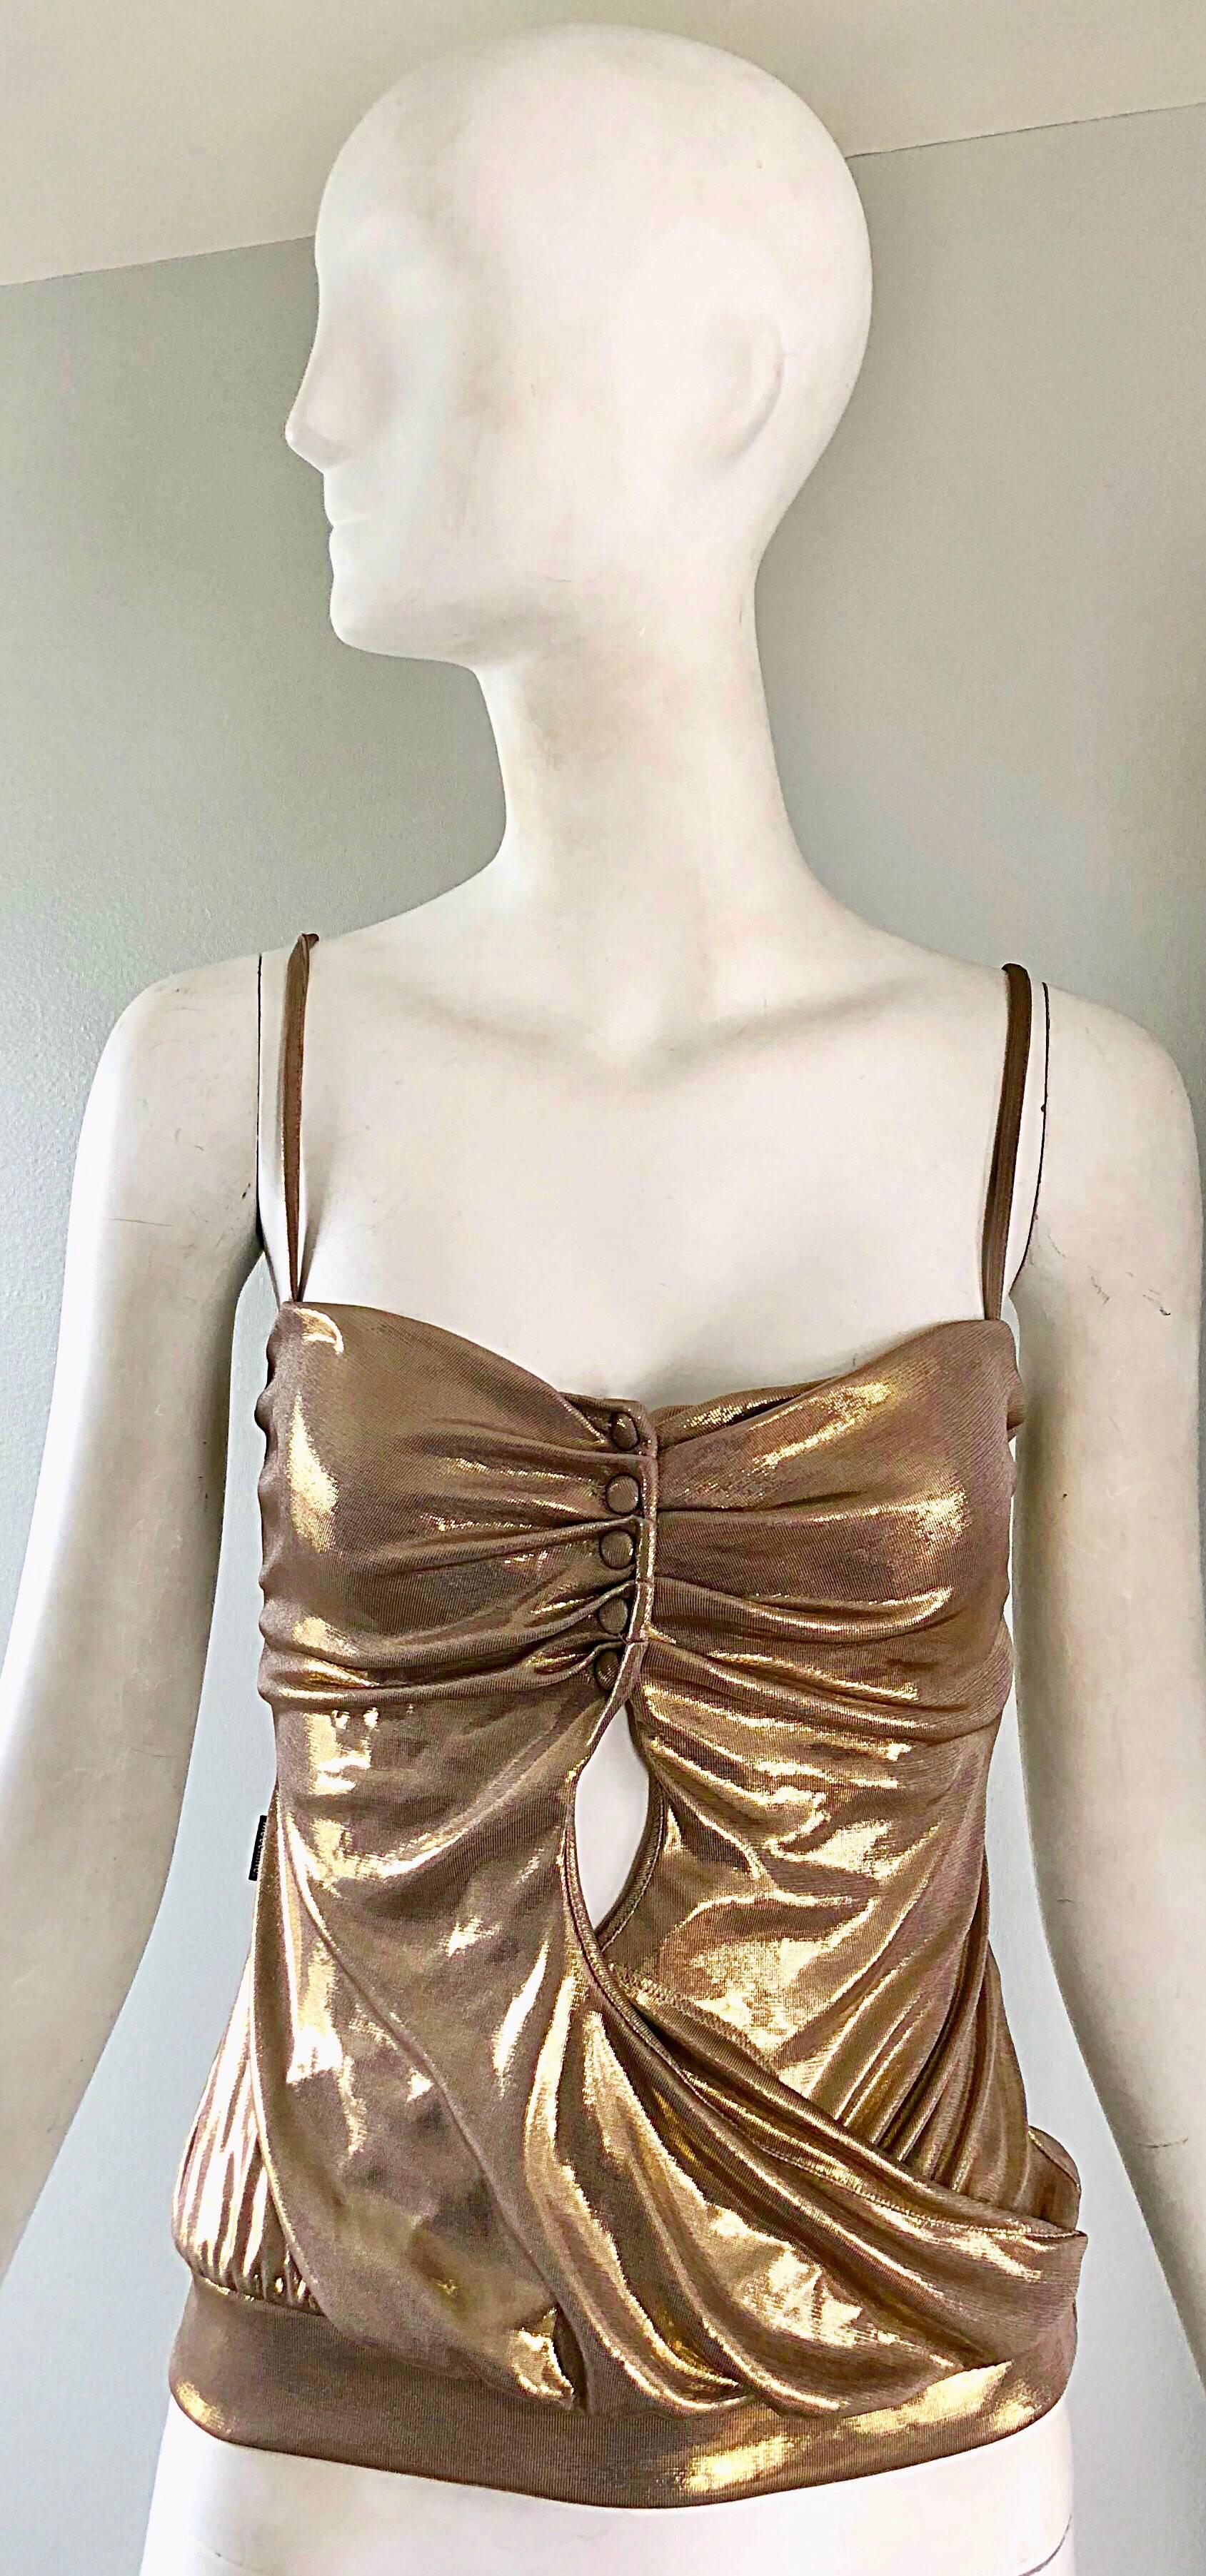 Sexy 1990s MOSCHINO gold cut-out spaghetti strap top! Features slinky gold metallic lame jersey. Mock buttons at top center bust, with cut-out detail below the bust. Elastic waistband stretches to fit. Very flattering top, that reveals just the